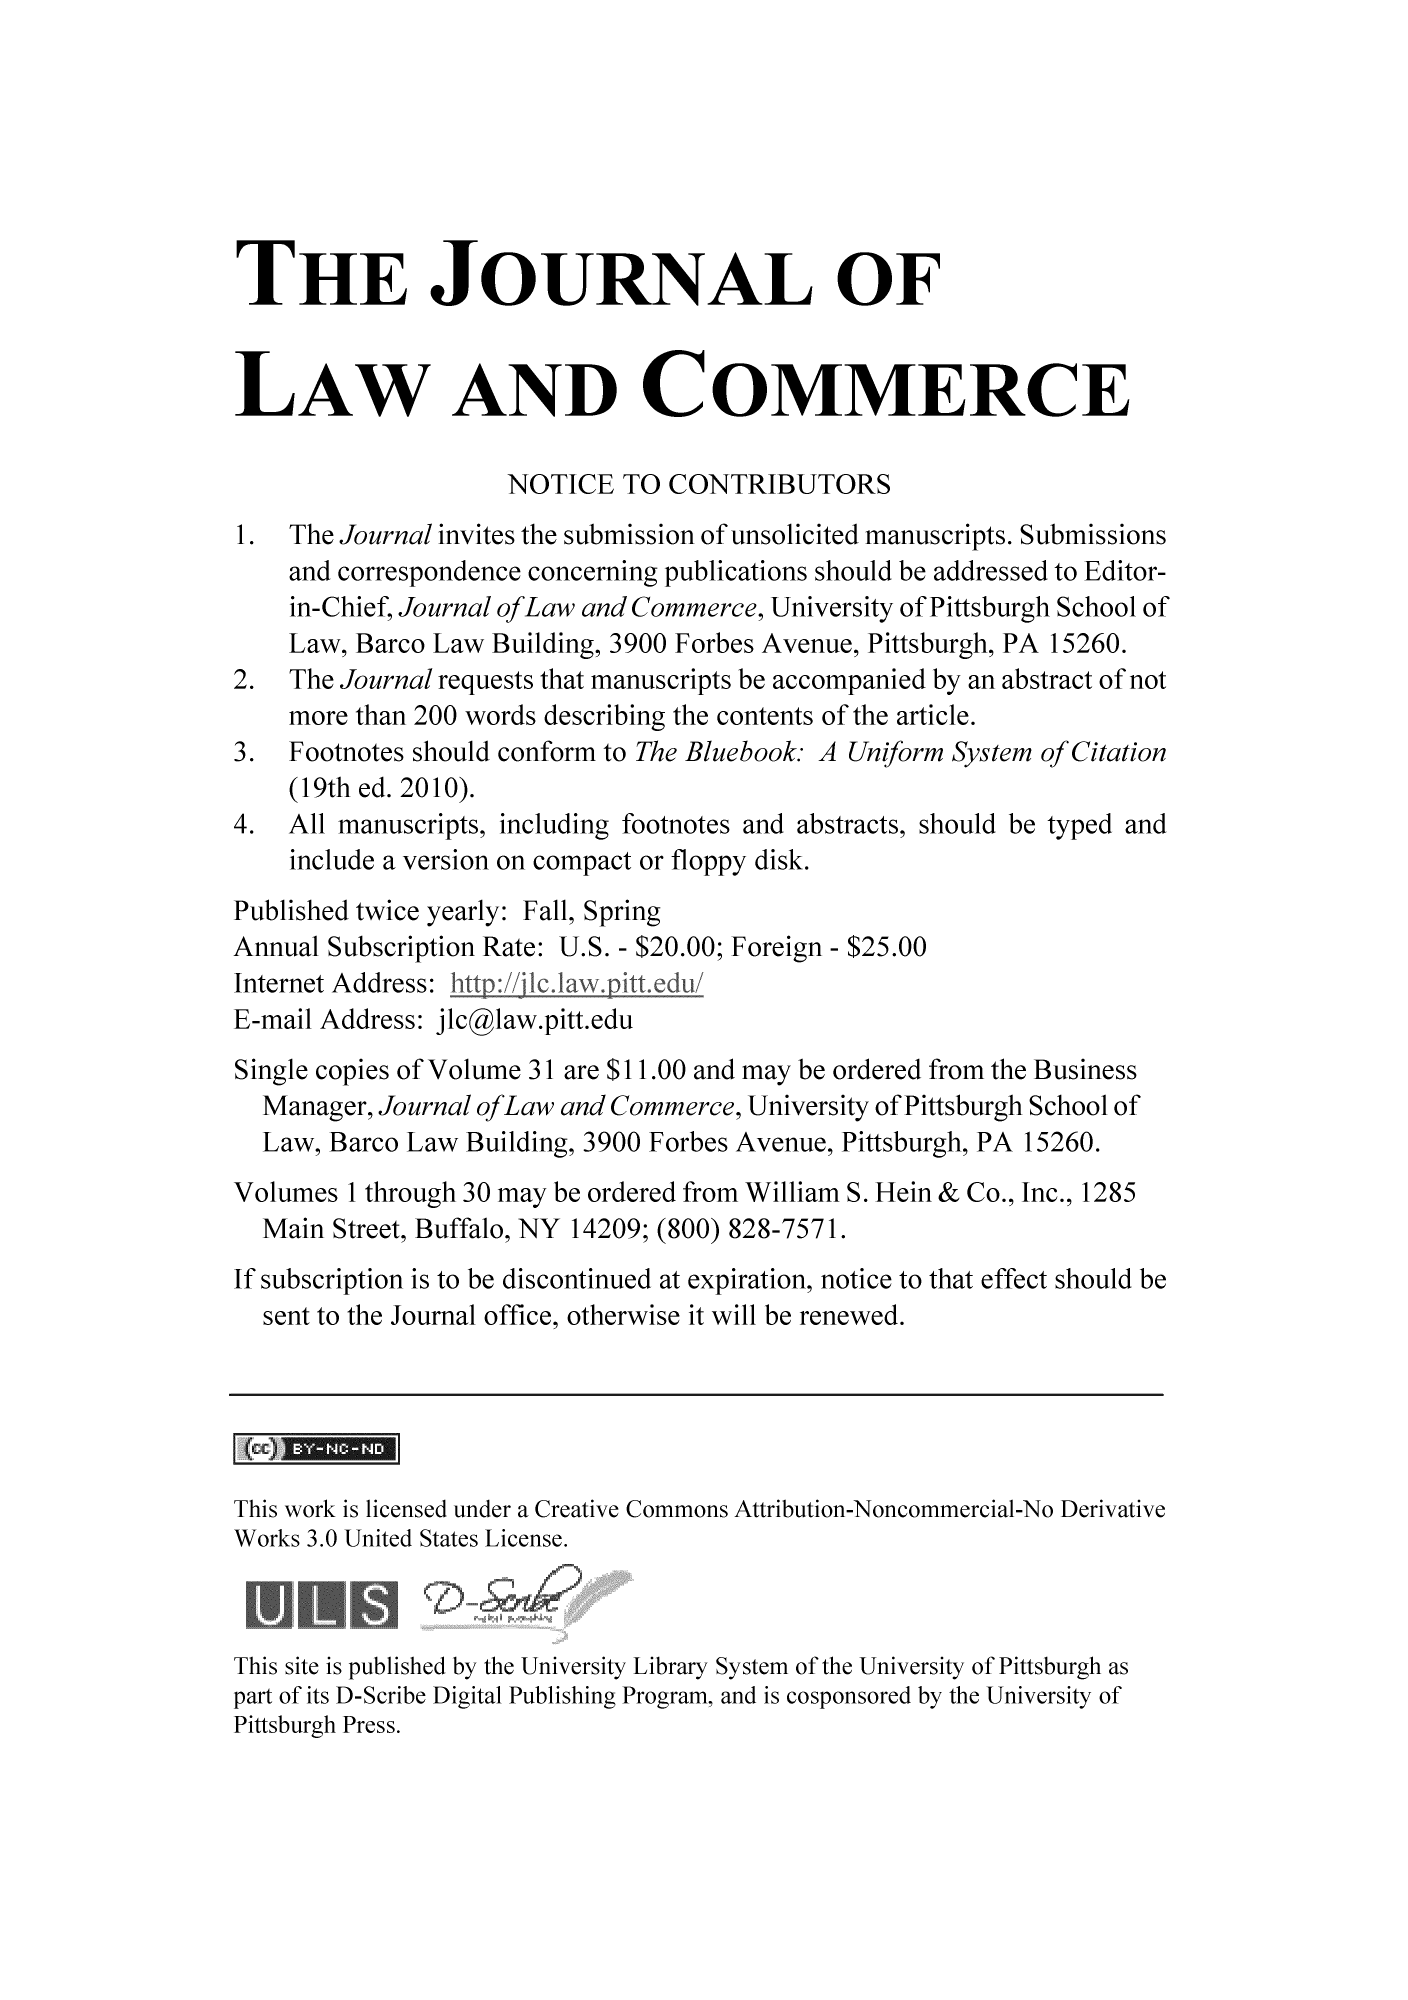 handle is hein.journals/jlac31 and id is 1 raw text is: THE JOURNAL OF
LAW AND COMMERCE
NOTICE TO CONTRIBUTORS
1.  The Journal invites the submission of unsolicited manuscripts. Submissions
and correspondence concerning publications should be addressed to Editor-
in-Chief, Journal ofLaw and Commerce, University of Pittsburgh School of
Law, Barco Law Building, 3900 Forbes Avenue, Pittsburgh, PA 15260.
2.  The Journal requests that manuscripts be accompanied by an abstract of not
more than 200 words describing the contents of the article.
3.  Footnotes should conform to The Bluebook. A Uniform System of Citation
(19th ed. 2010).
4.  All manuscripts, including footnotes and abstracts, should be typed and
include a version on compact or floppy disk.
Published twice yearly: Fall, Spring
Annual Subscription Rate: U.S. - $20.00; Foreign - $25.00
Internet Address:
E-mail Address: jlcglaw.pitt.edu
Single copies of Volume 31 are $11.00 and may be ordered from the Business
Manager, Journal ofLaw and Commerce, University of Pittsburgh School of
Law, Barco Law Building, 3900 Forbes Avenue, Pittsburgh, PA 15260.
Volumes 1 through 30 may be ordered from William S. Hein & Co., Inc., 1285
Main Street, Buffalo, NY 14209; (800) 828-7571.
If subscription is to be discontinued at expiration, notice to that effect should be
sent to the Journal office, otherwise it will be renewed.
This work is licensed under a Creative Commons Attribution-Noncommercial-No Derivative
Works 3.0 United States License.
This site is published by the University Library System of the University of Pittsburgh as
part of its D-Scribe Digital Publishing Program, and is cosponsored by the University of
Pittsburgh Press.


